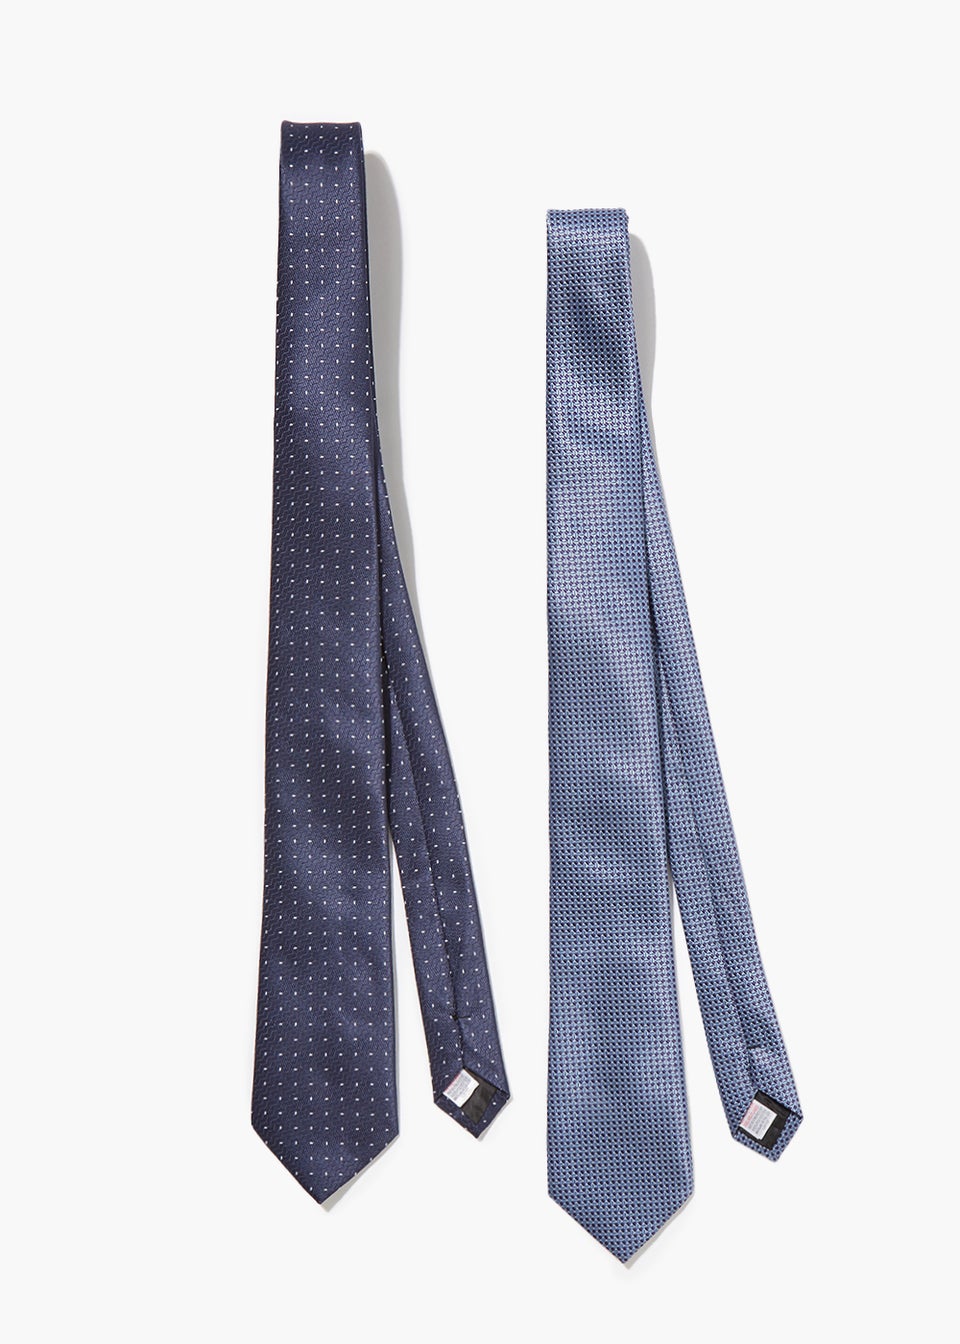 Taylor & Wright 2 Pack Ties